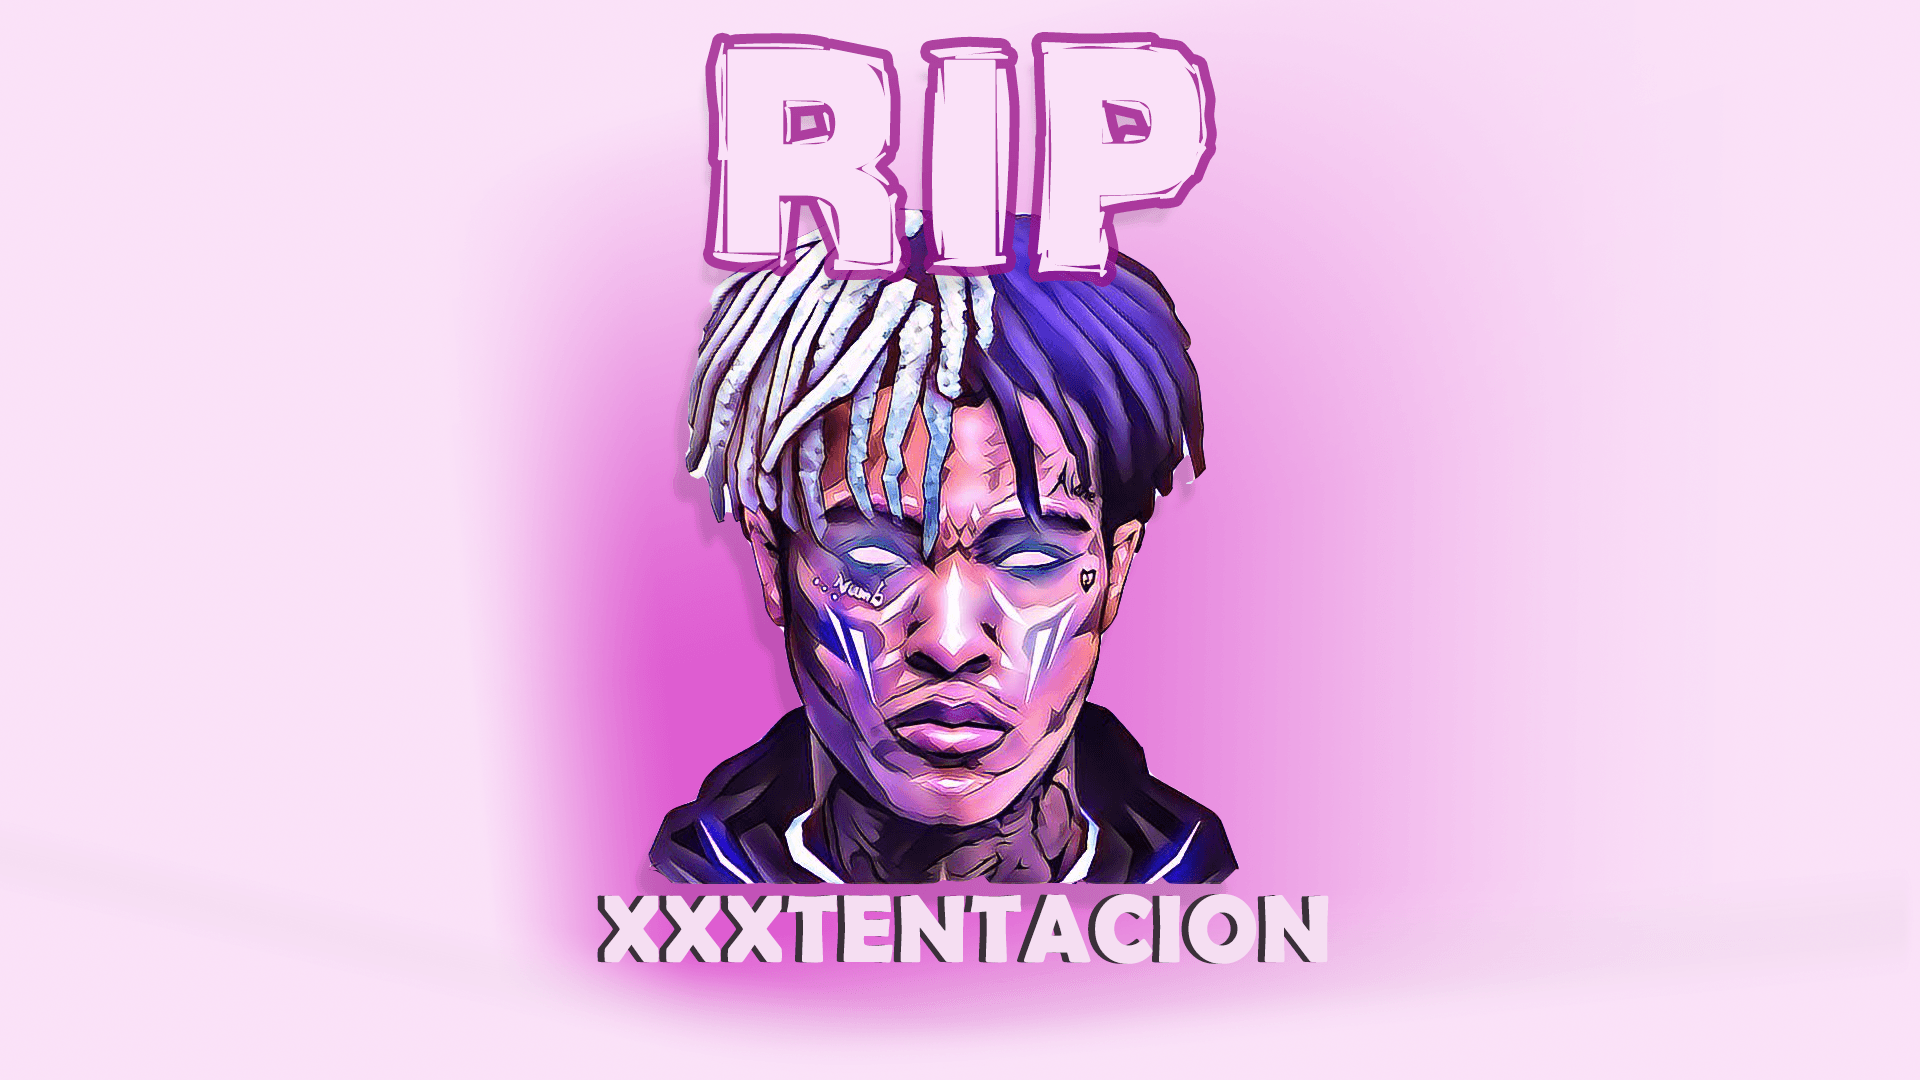 Rip Xxxtentacion Desktop Wallpapers On Wallpaperdog Please contact us if you want to publish a xxxtentacion wallpaper on our site. rip xxxtentacion desktop wallpapers on